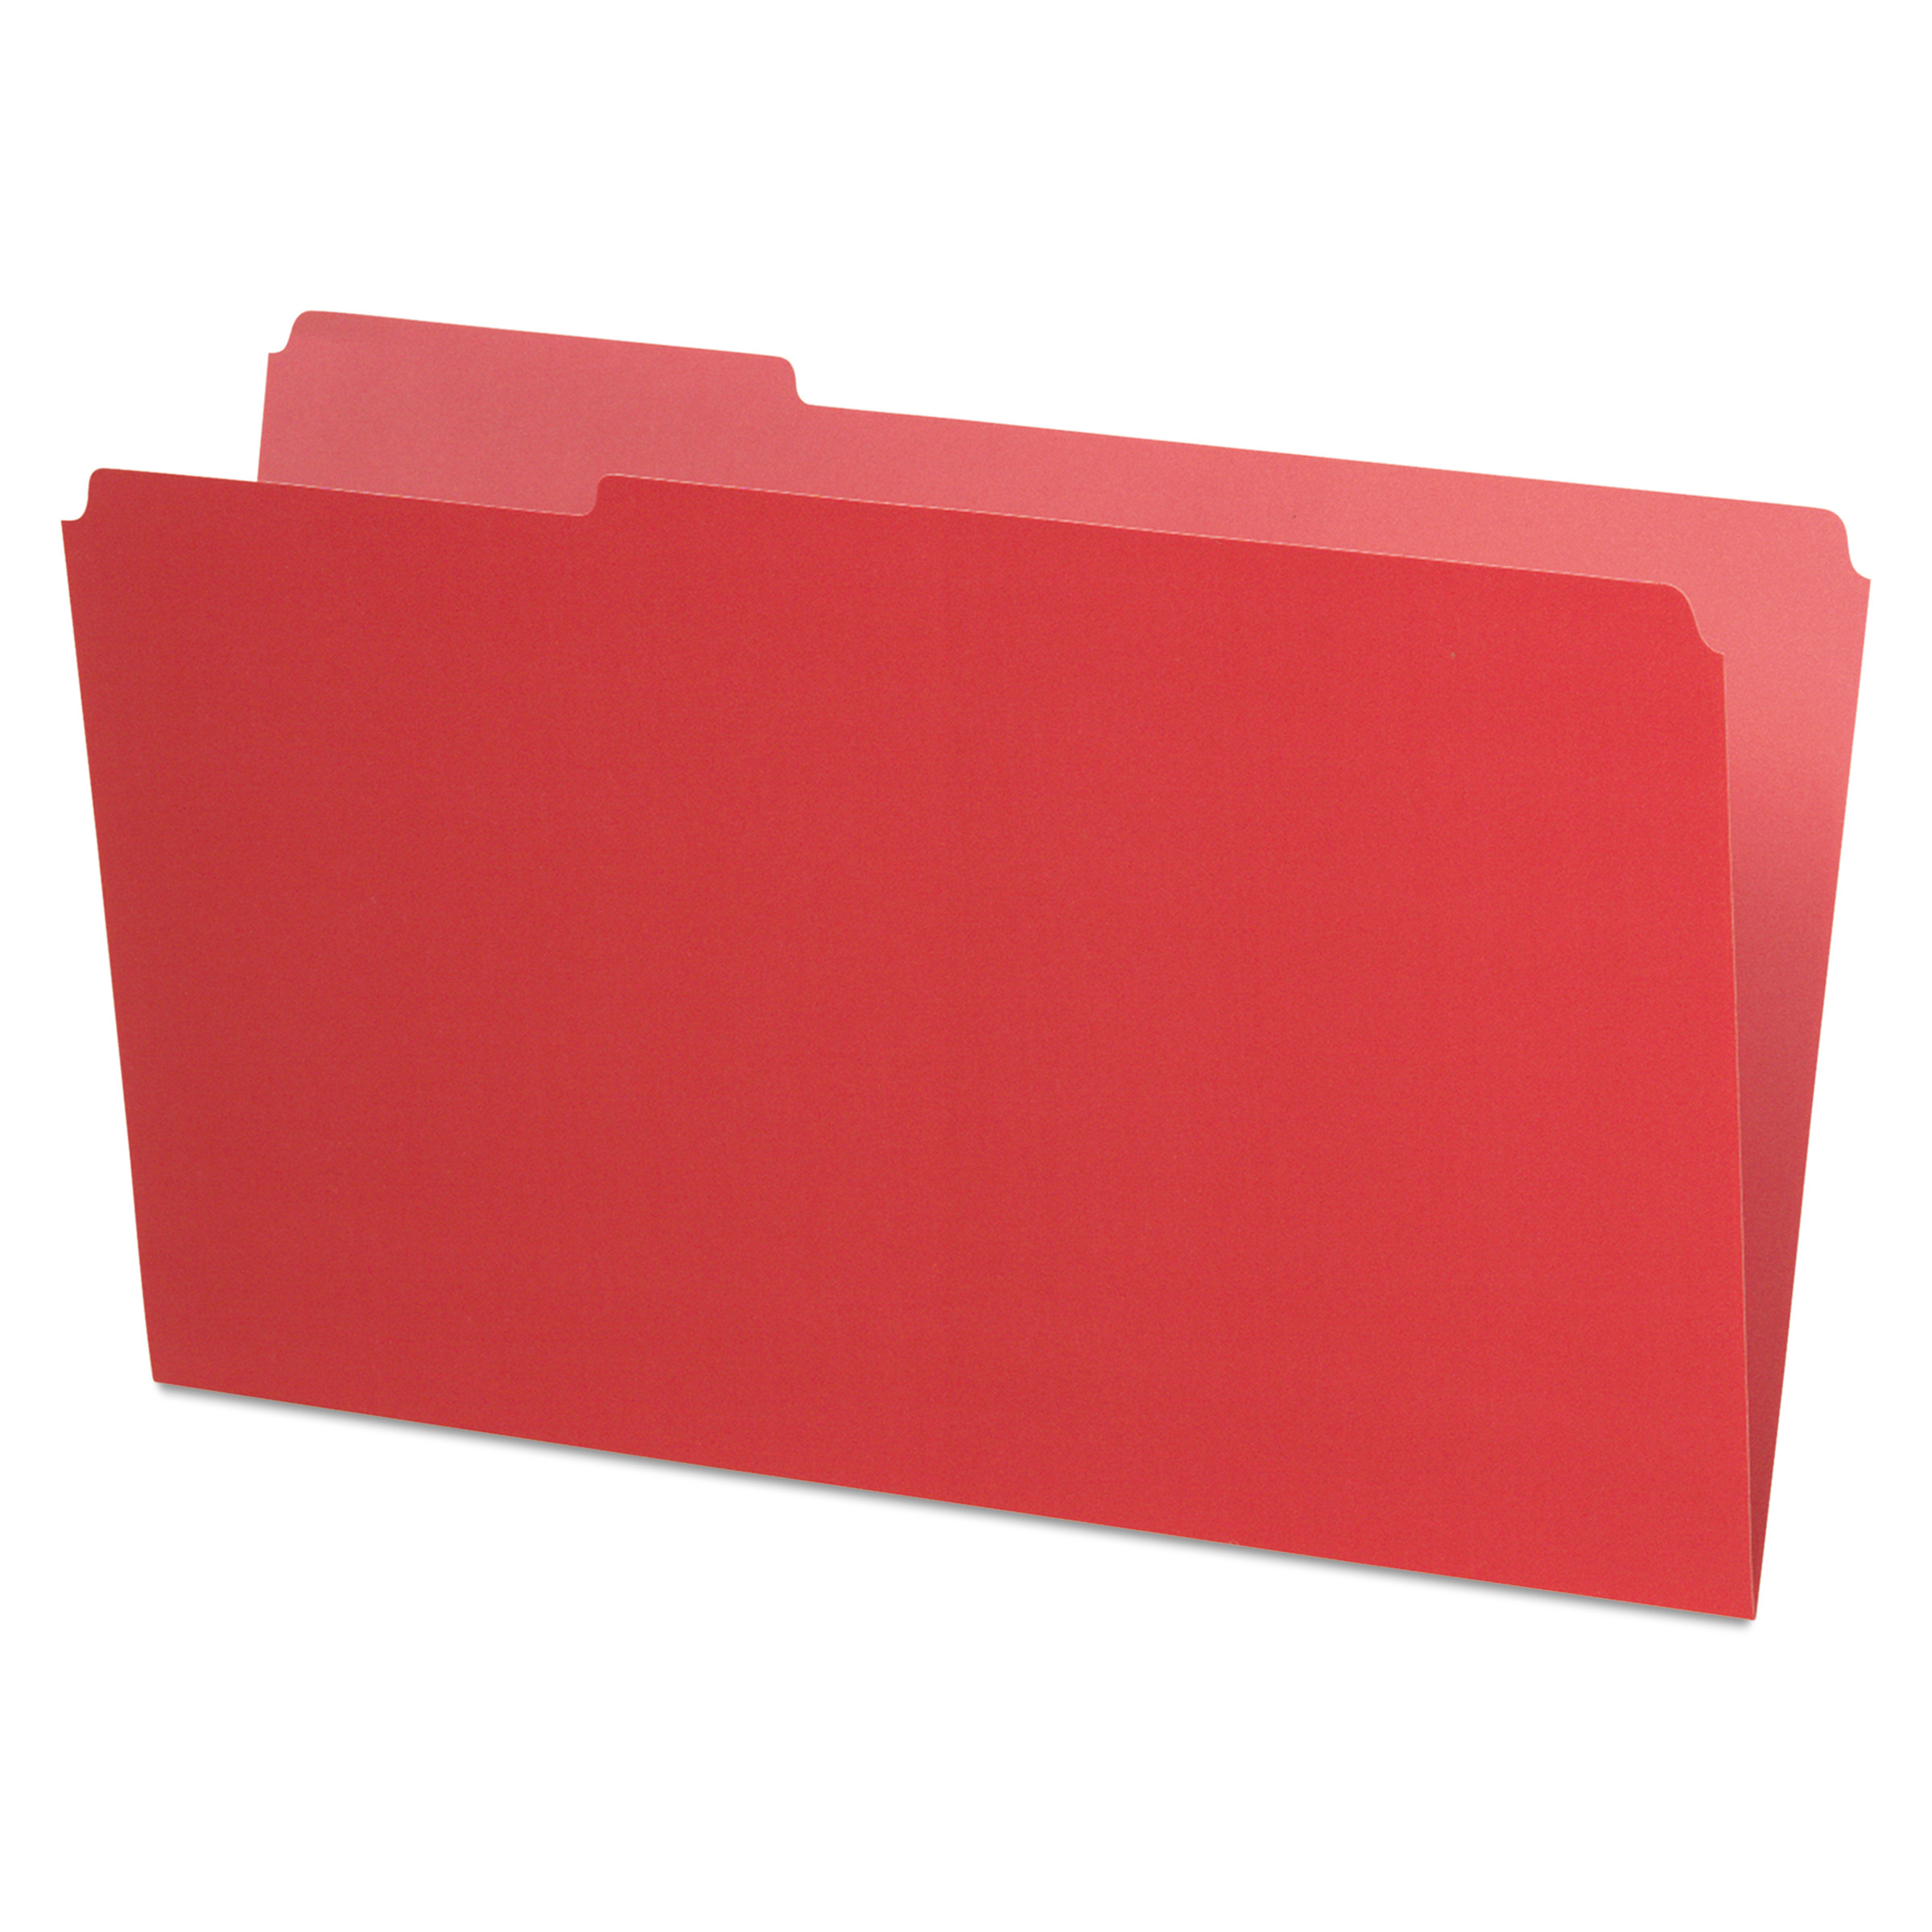  Pendaflex 4350 1/3 RED Interior File Folders, 1/3-Cut Tabs, Legal Size, Red, 100/Box (PFX435013RED) 